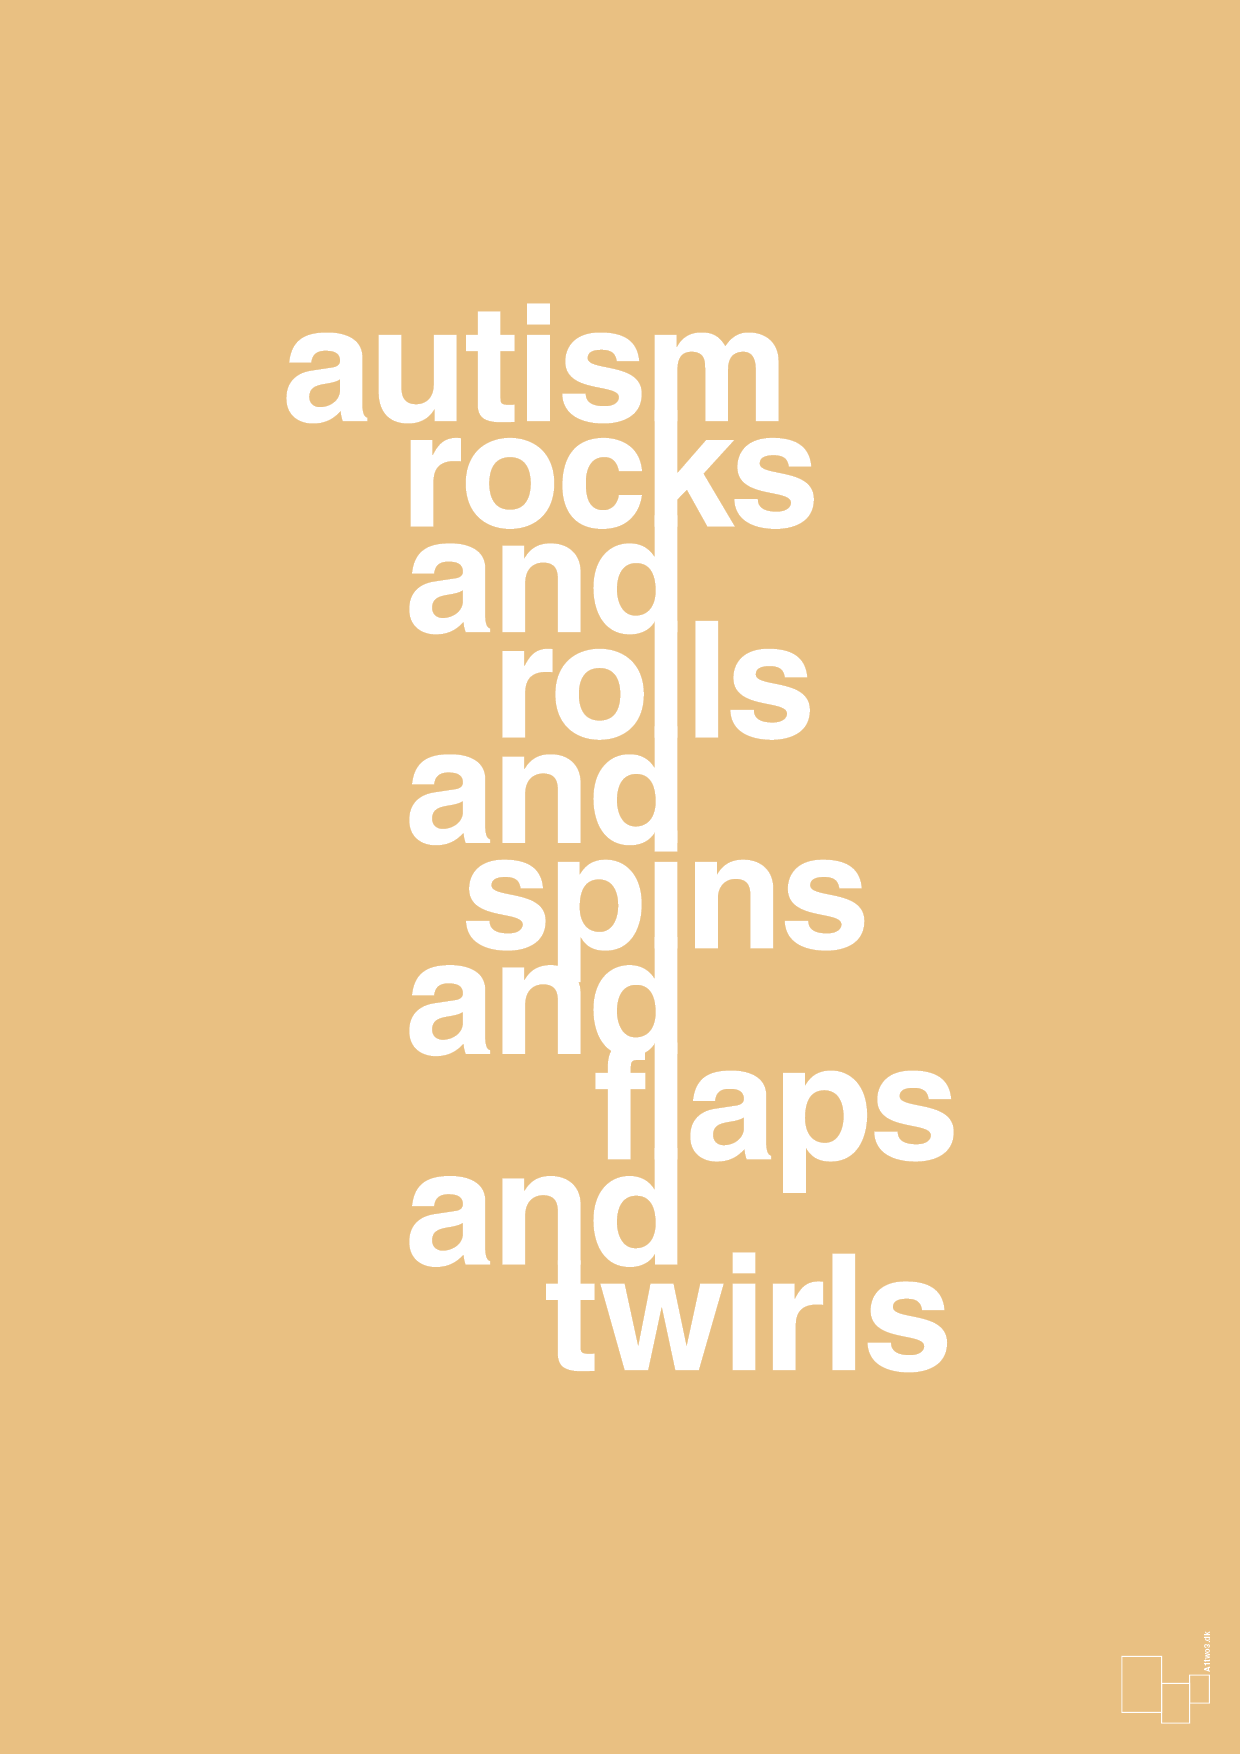 autism rocks and rolls and spins and flaps and twirls - Plakat med Samfund i Charismatic